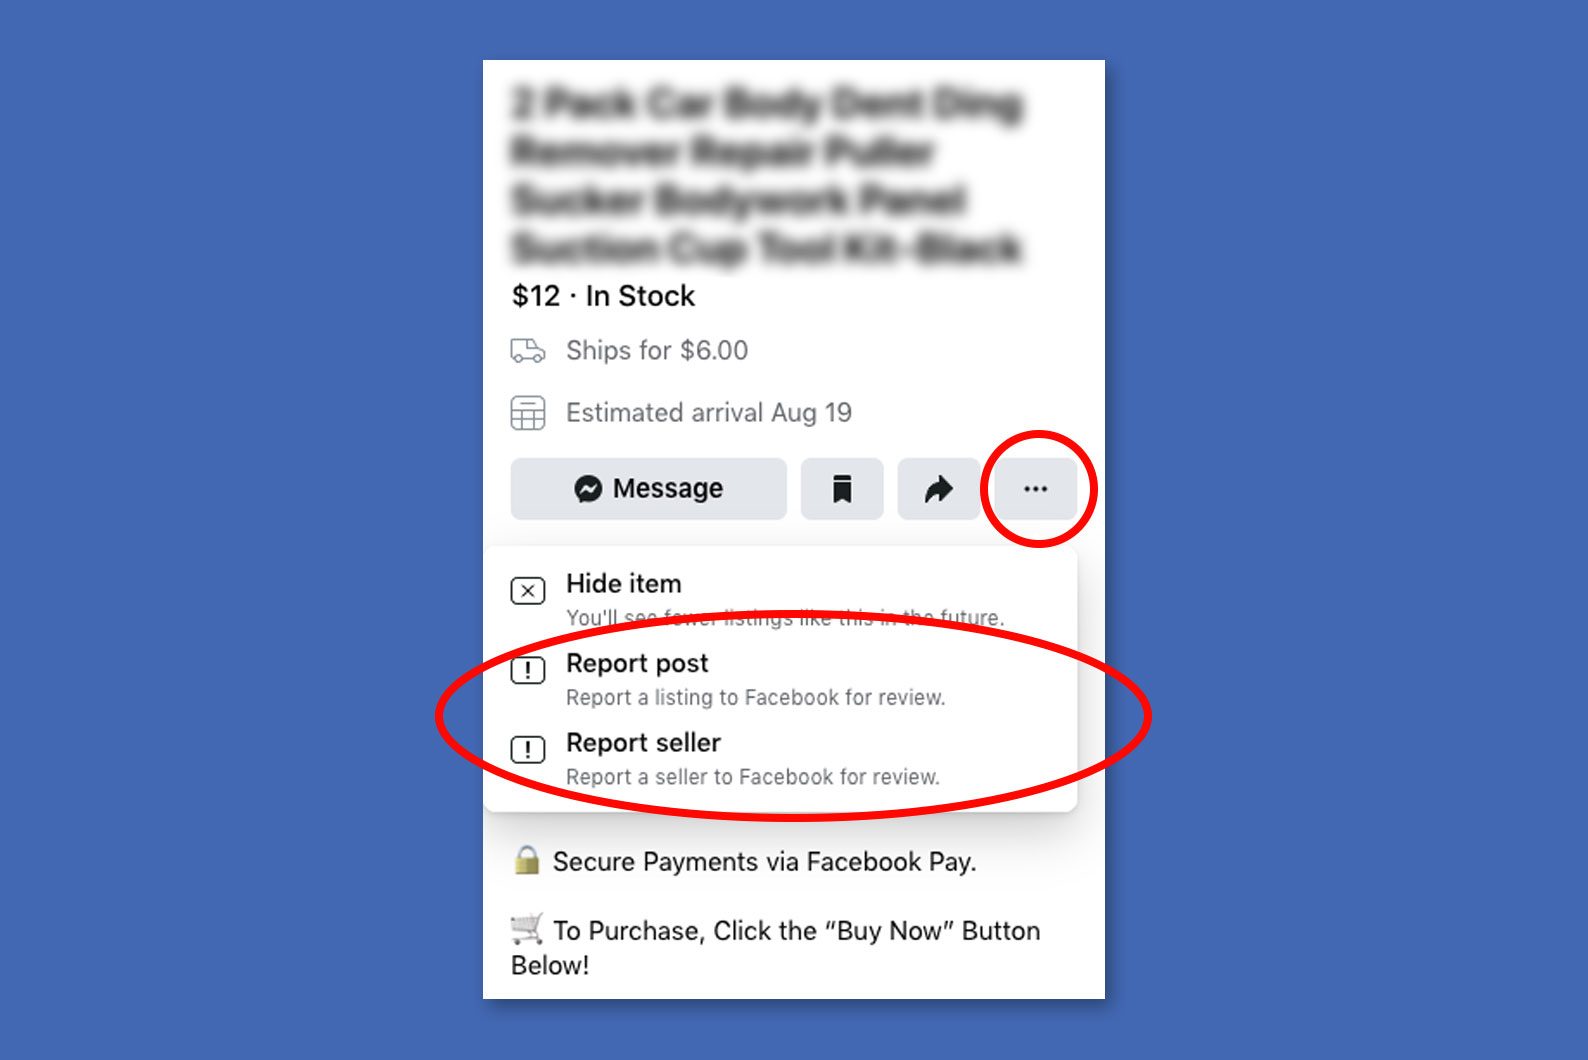 Facebook Marketplace Scams: How to Spot Them and Protect Yourself